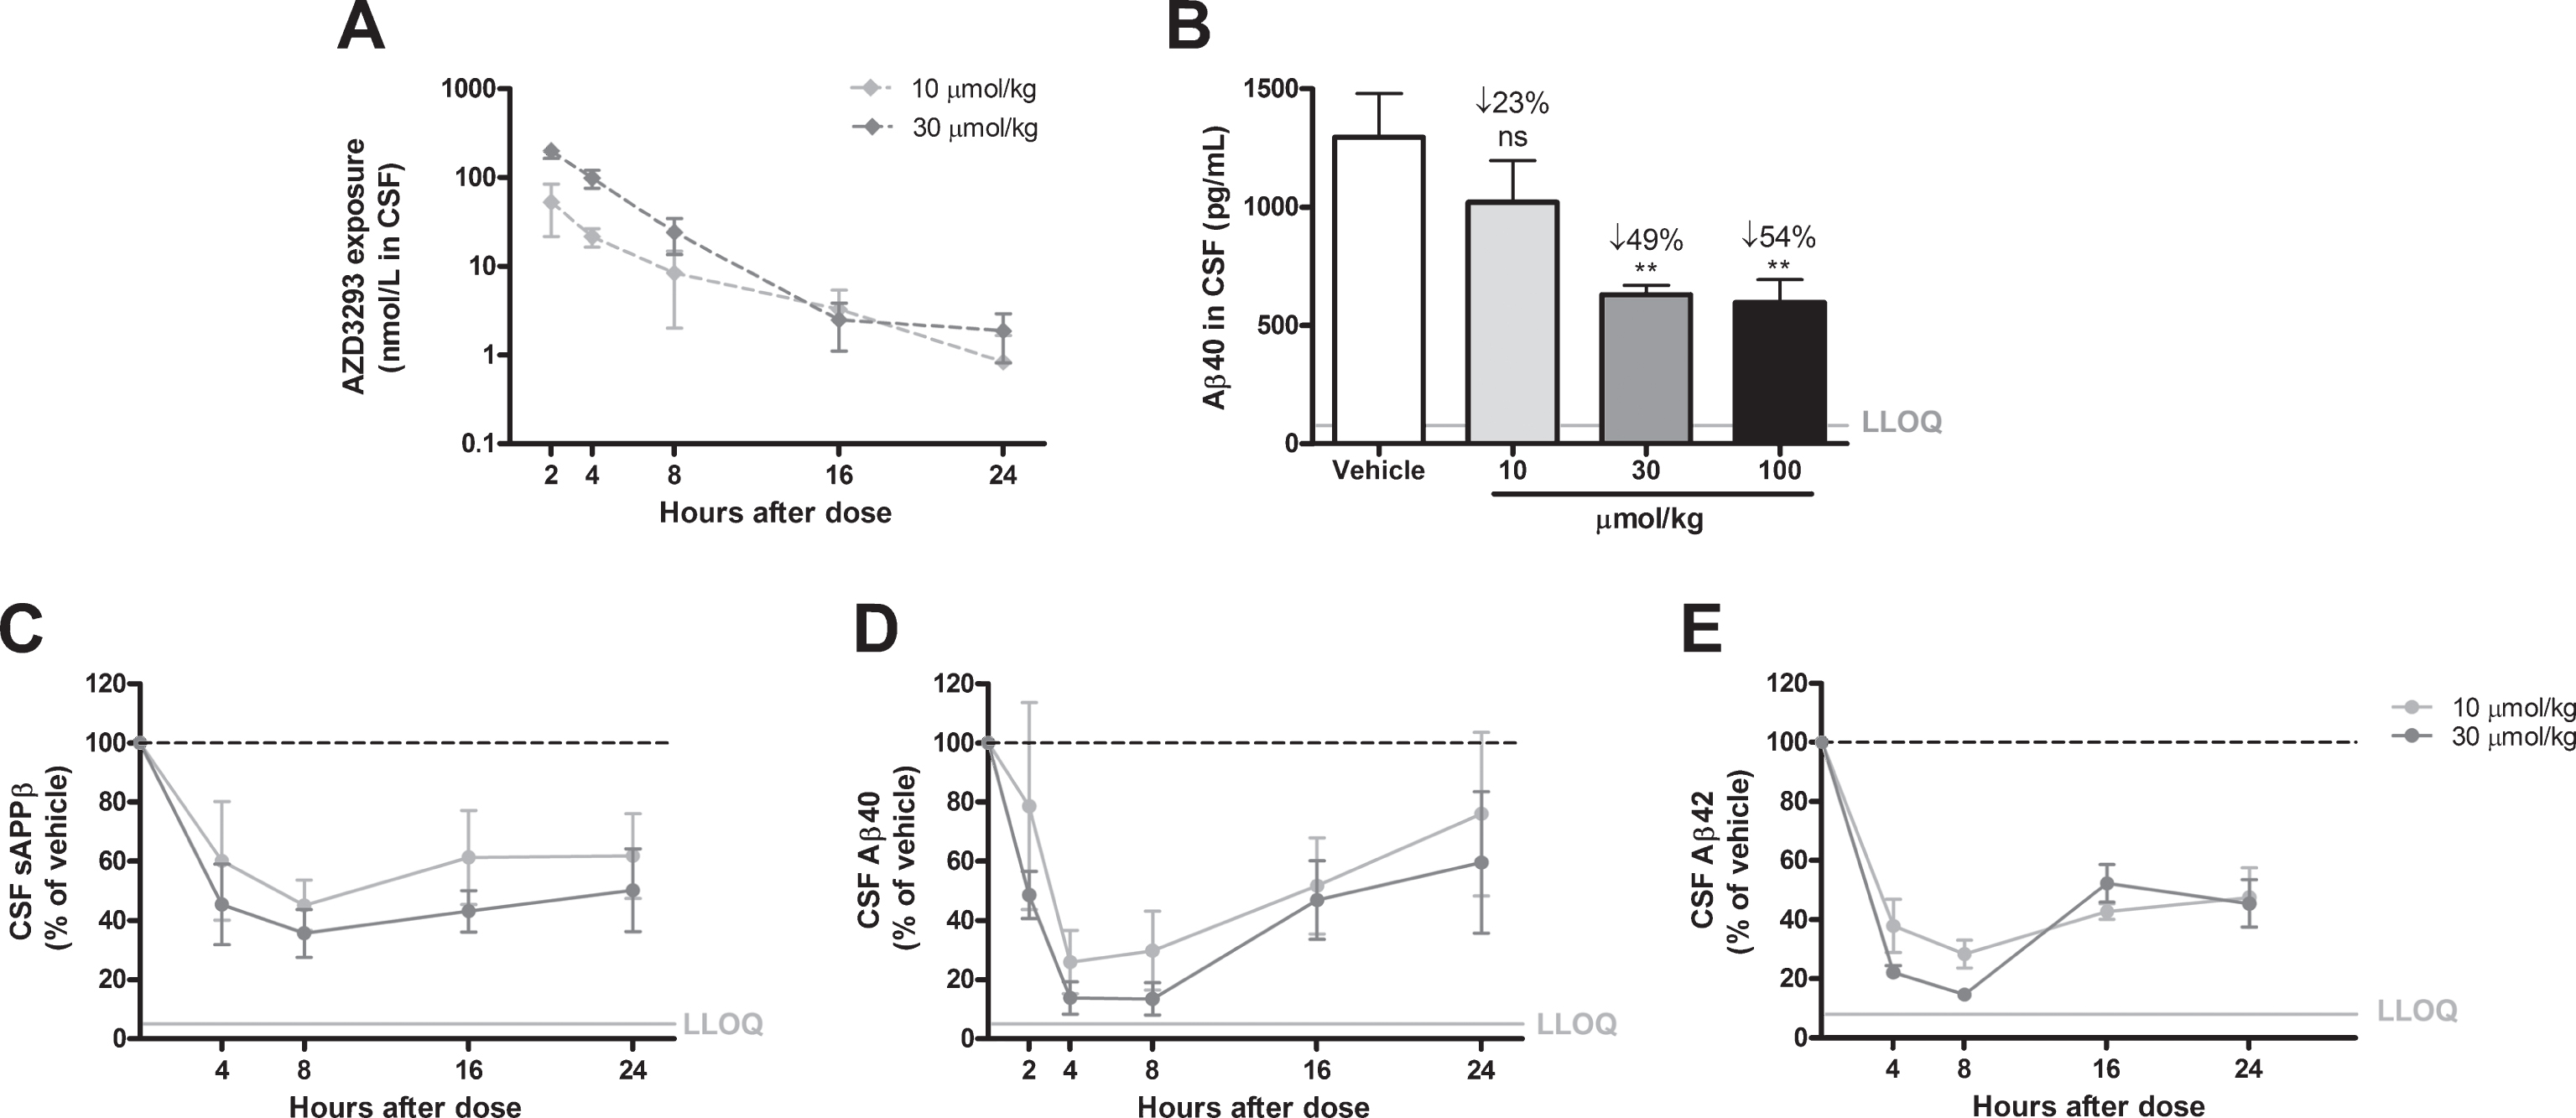 Time- and dose-dependent inhibition of CSF Aβ in guinea pigs after a single administration of AZD3293. Maximum CSF AZD3293 concentration was observed at 2 h after dosing (A). Dose-dependent reduction of Aβ40 was studied at 2 h after a single administration of AZD3293, with the 2 highest doses (30 and 100μmol/kg) resulting in significant effect (B). Maximum effect on CSF sAβPPβ was observed at around 8 h after the dose, and the effect was sustained for up to 24 h (C). CSF Aβ40 (D) and Aβ42 (E) displayed maximum concentrations between 4 and 8 h after AZD3293 administration. CSF Aβ40 appeared to have returned to baseline at 24 h. Data are presented as Mean±SEM ( *p <  0.05;  **p <  0.01,  ***p <  0.001, compared with vehicle). Lower limit of quantification(LLOQ).